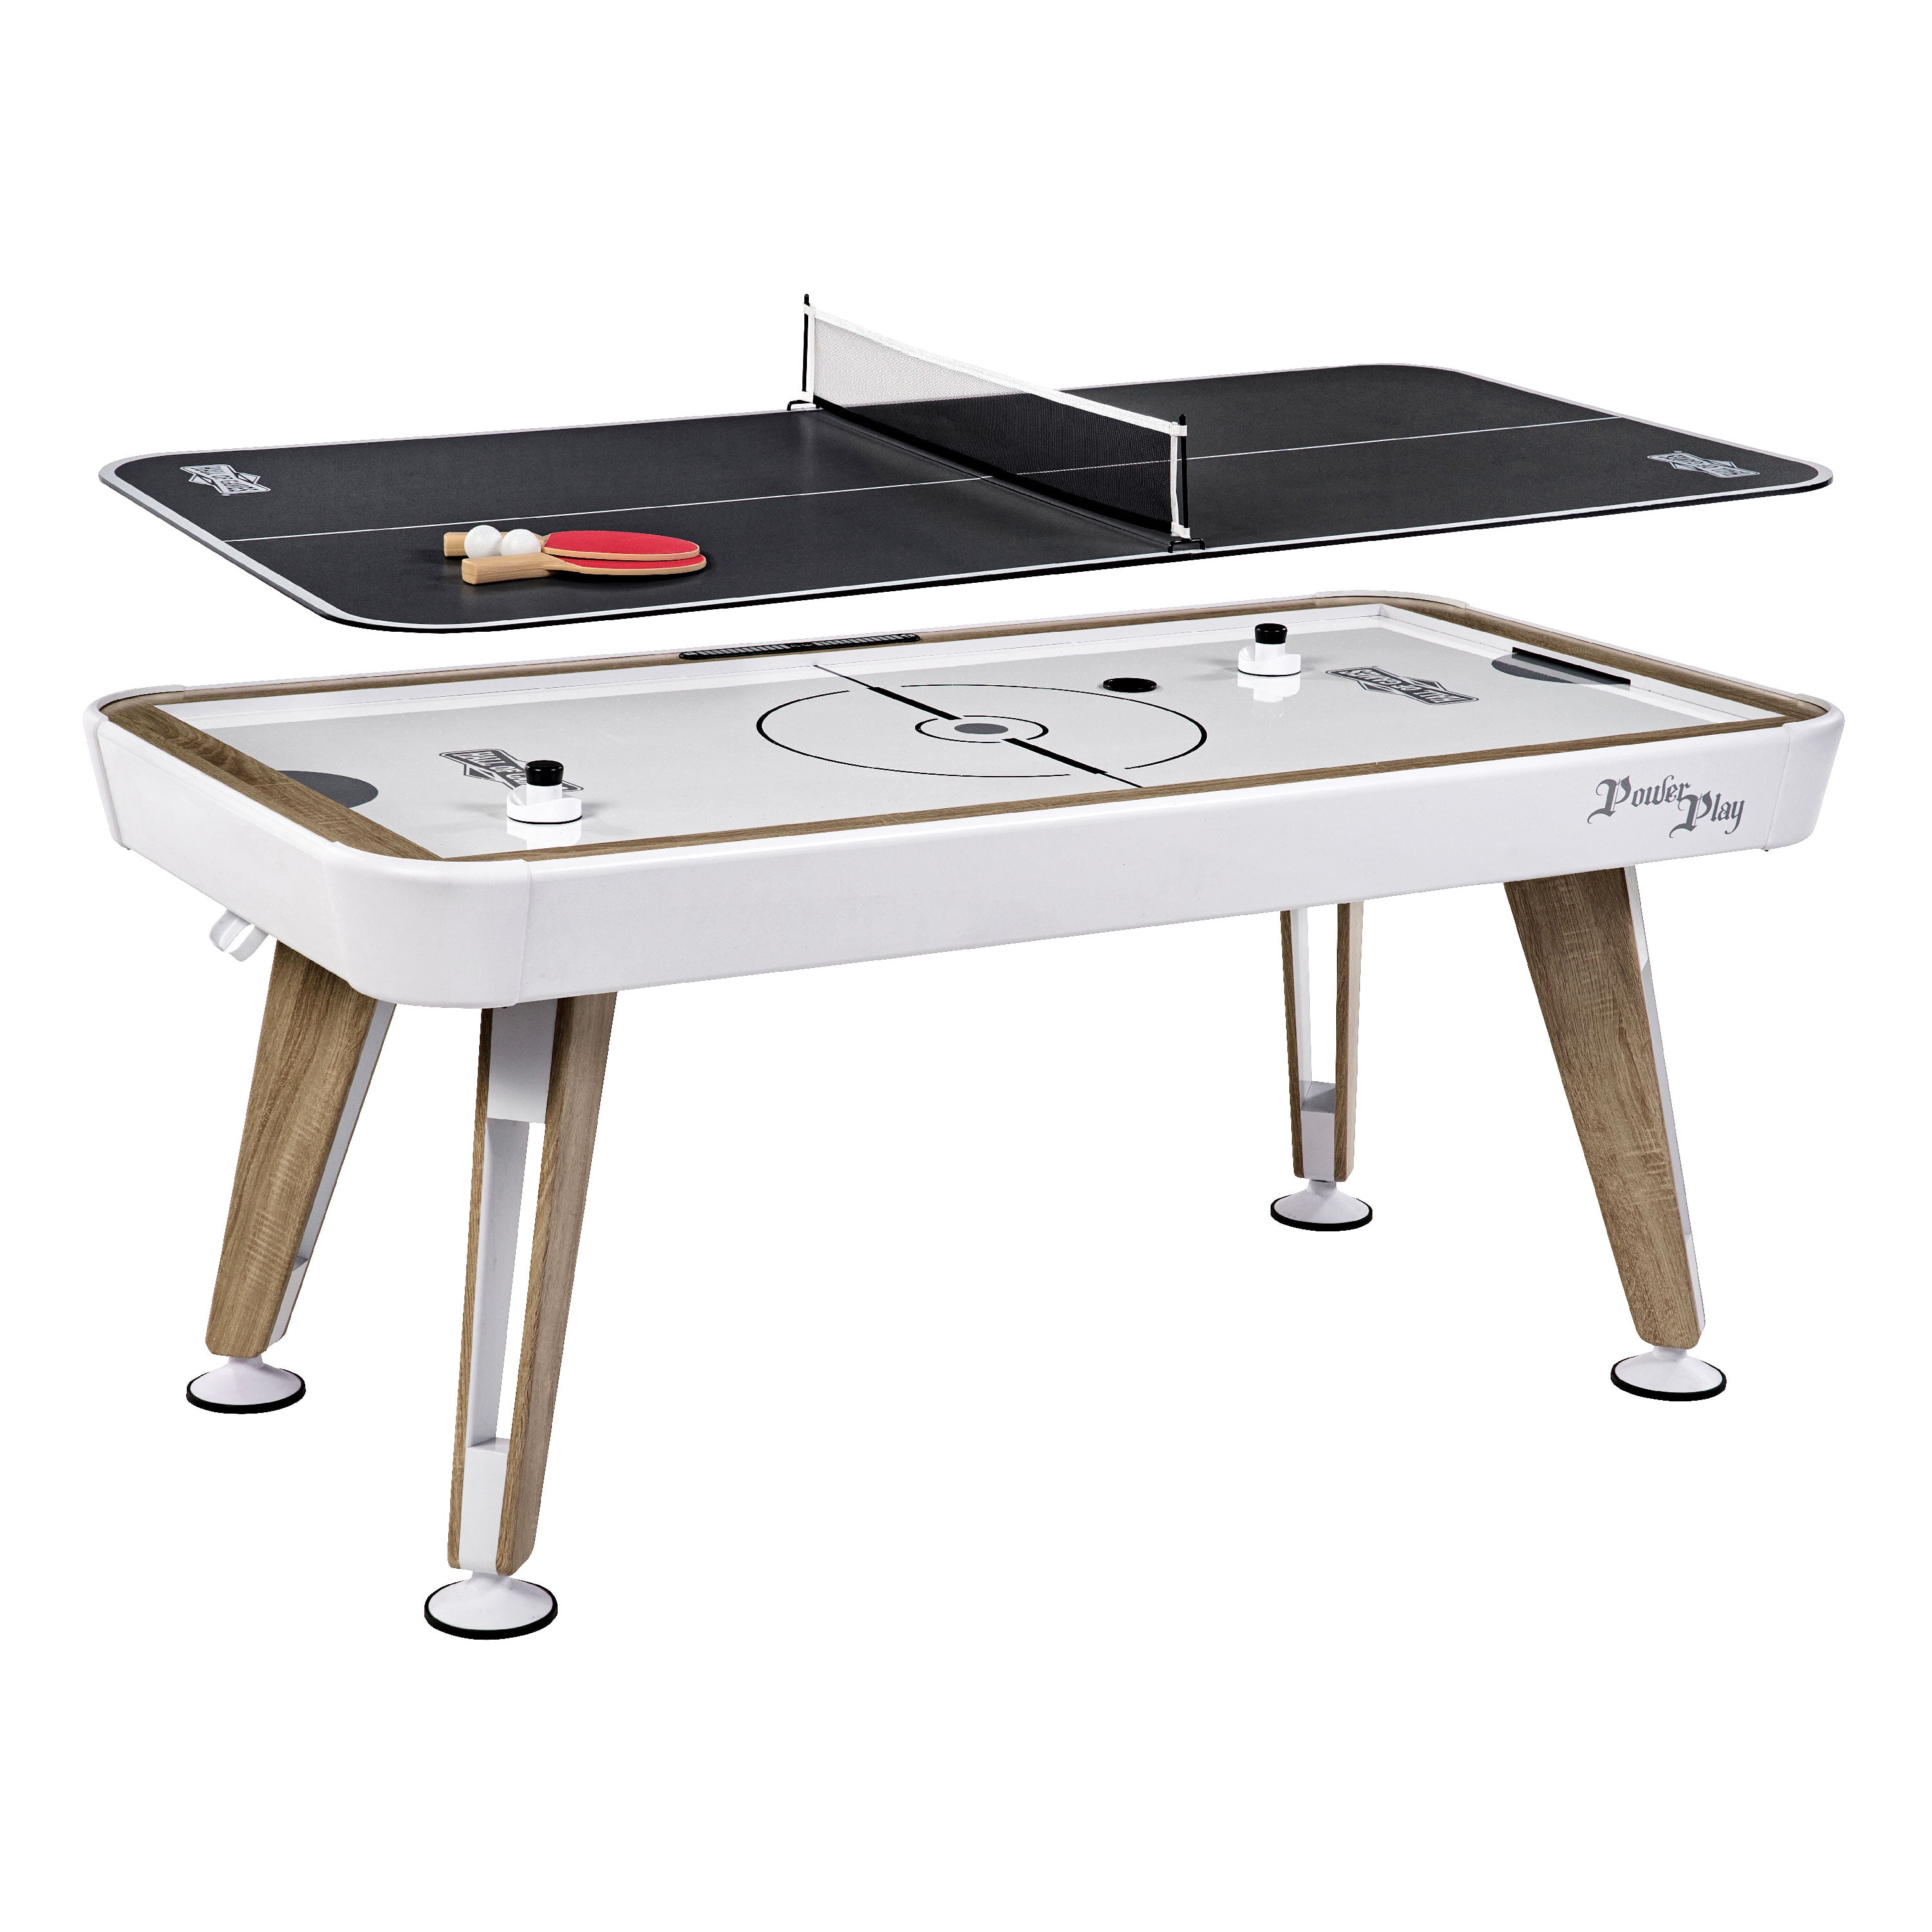 Hall of Games 66 Air Powered Hockey with Table Tennis Top